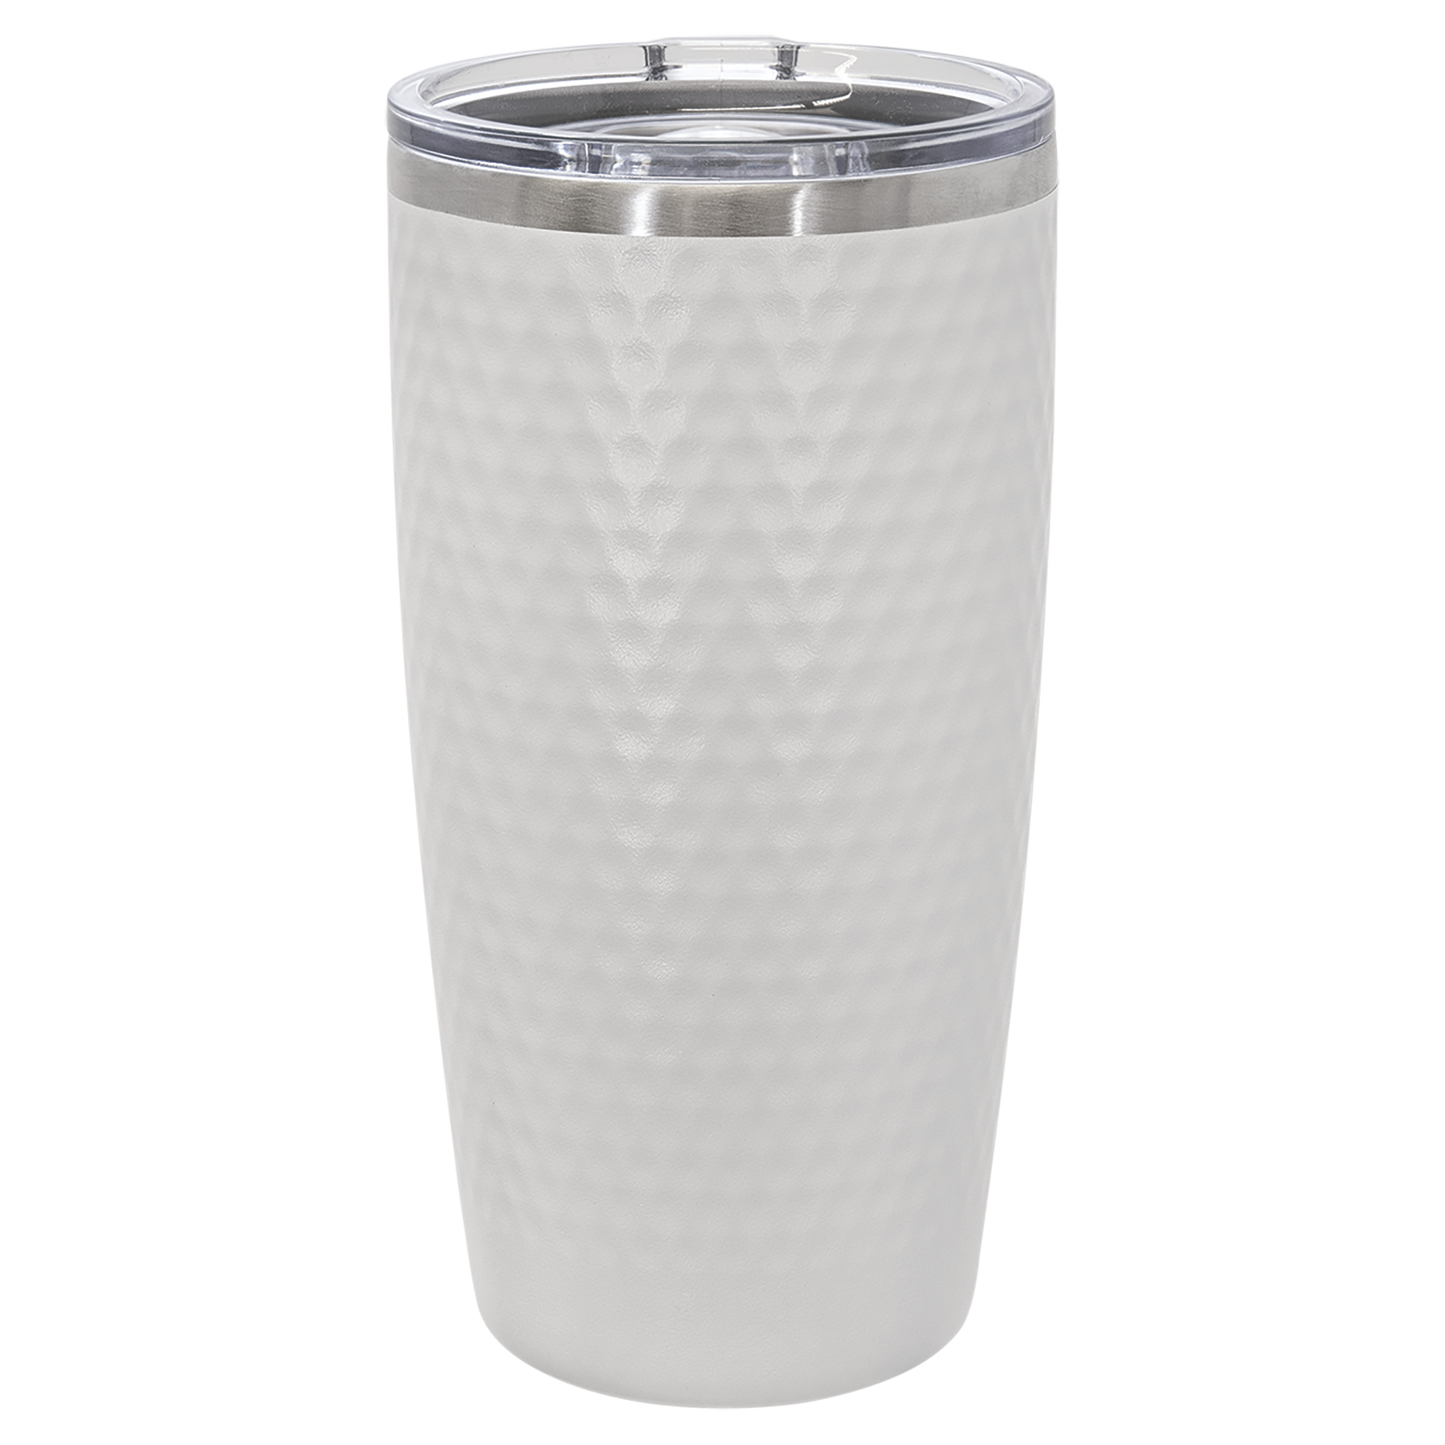 20 oz. White Golf Tumbler with Dimples and Clear Slider Lid